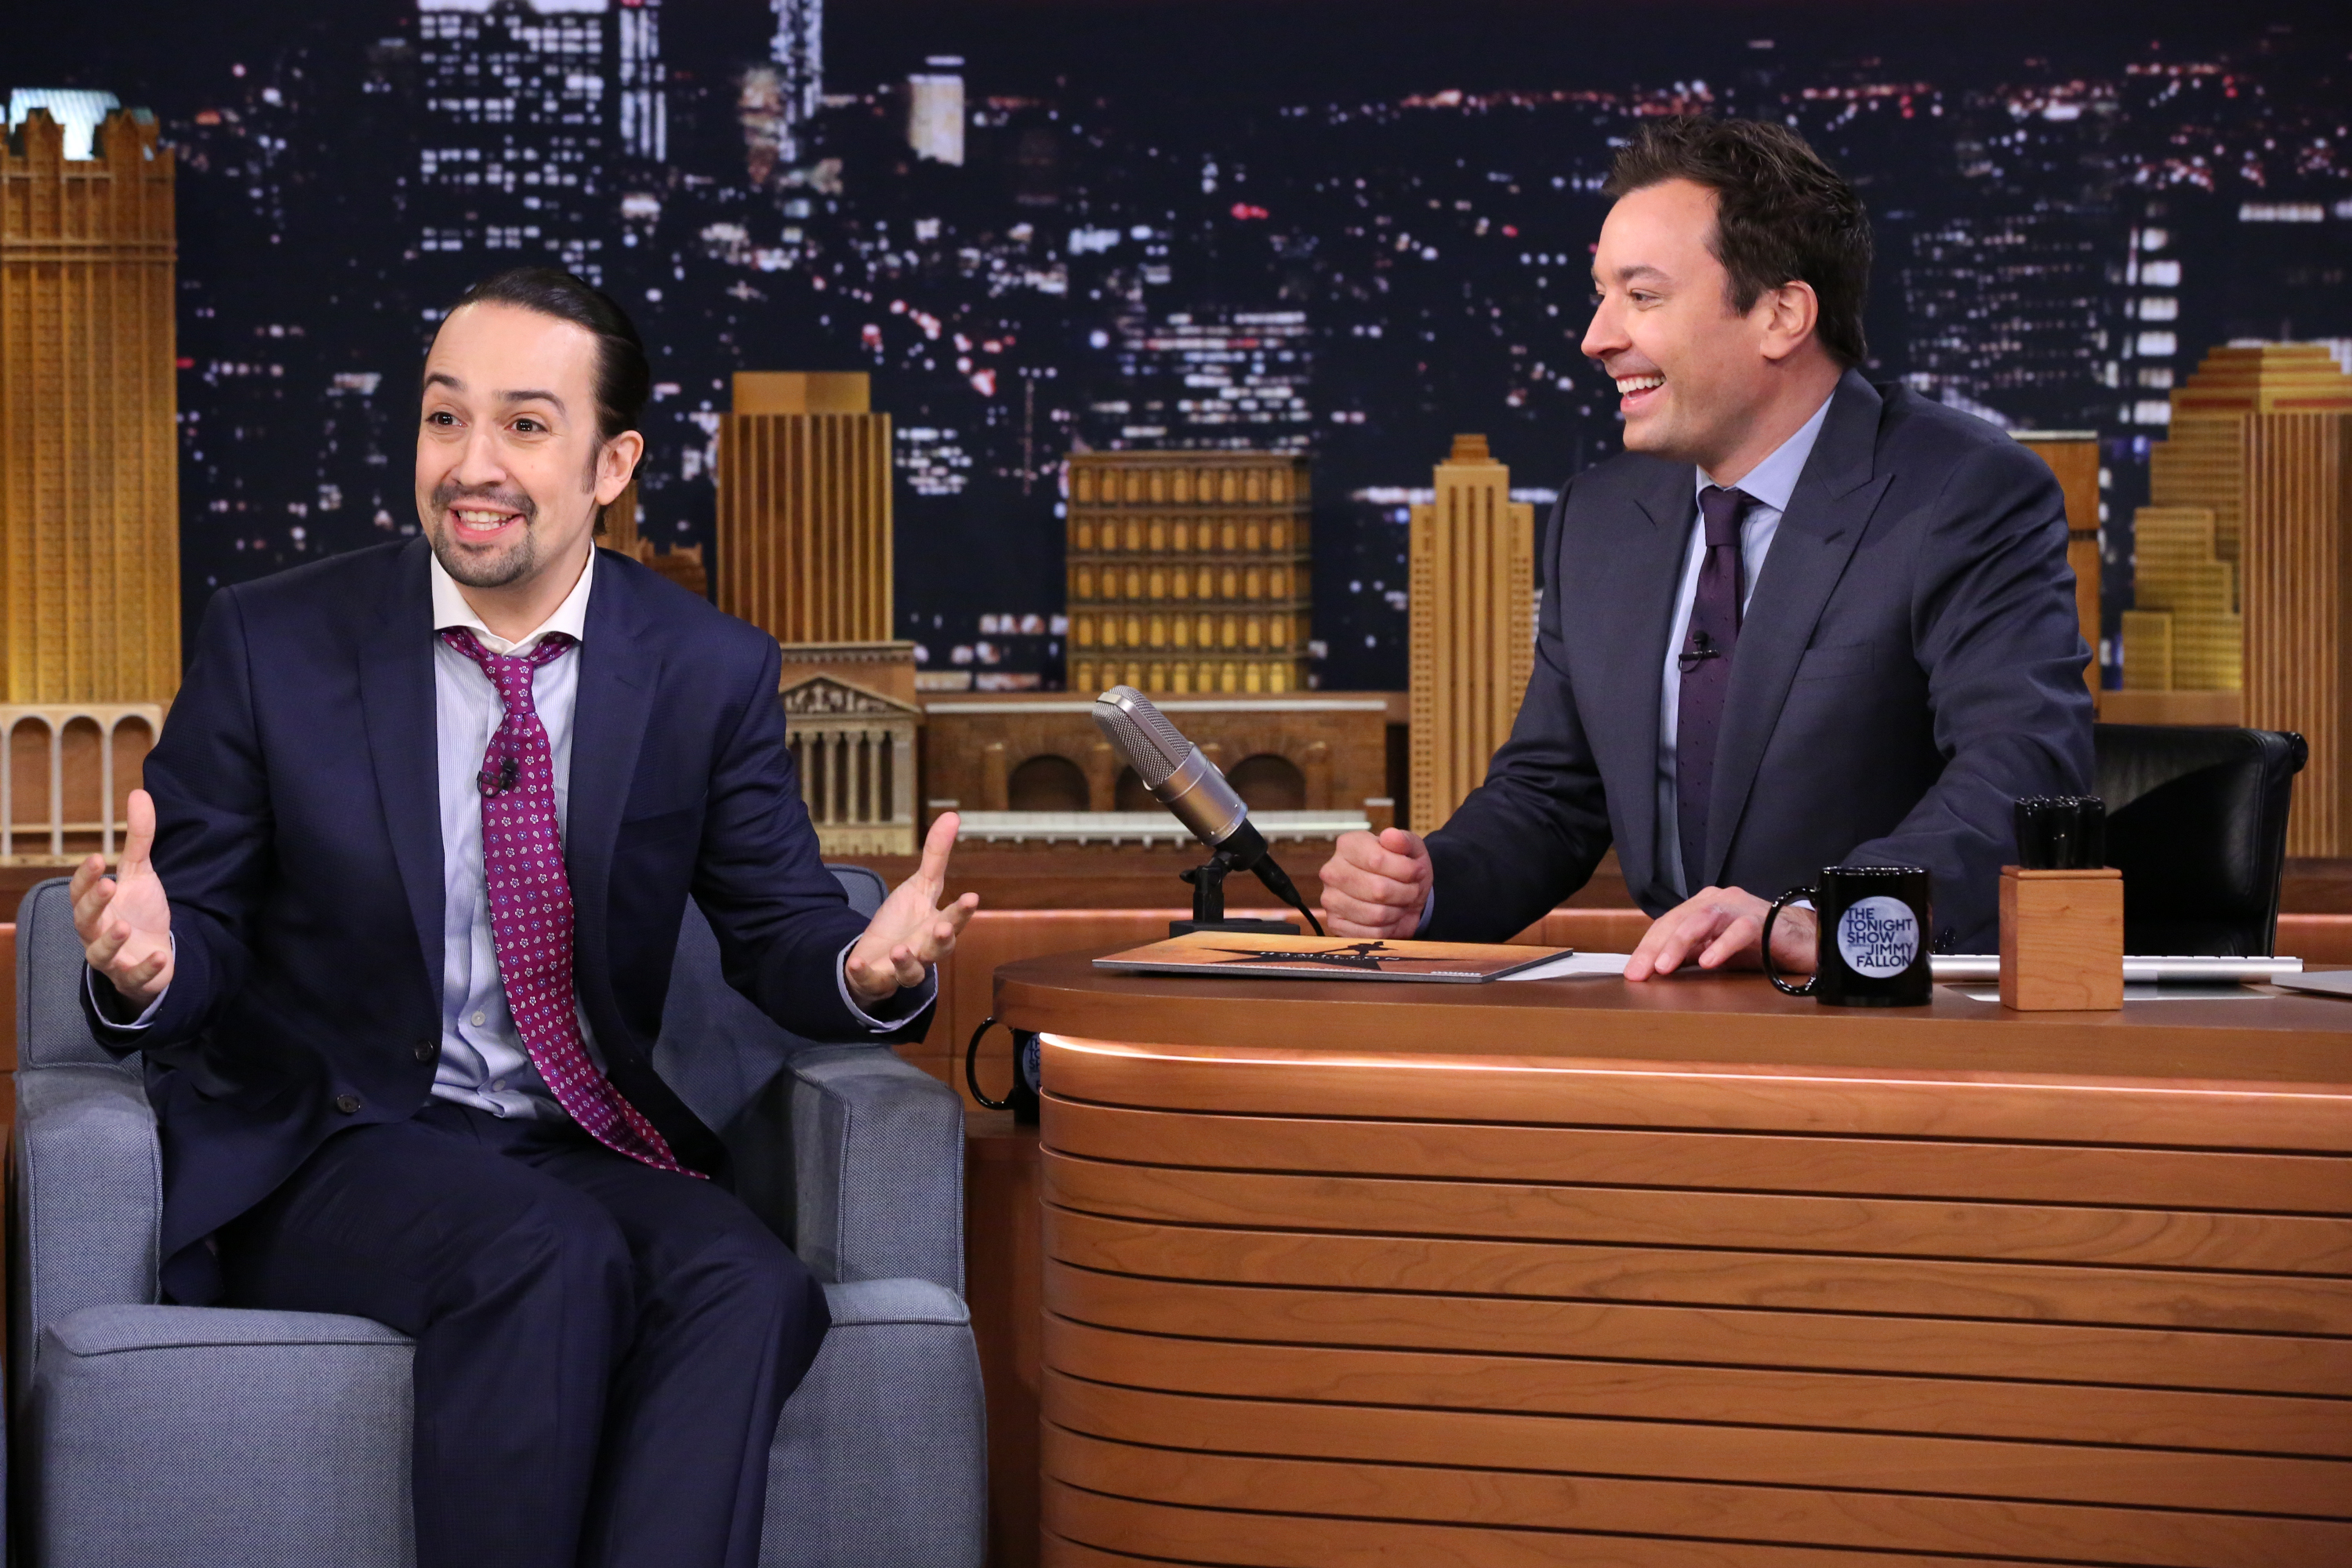 Lin-Manuel Miranda during an interview with host Jimmy Fallon on Nov. 6, 2015. (NBC/Getty Images)